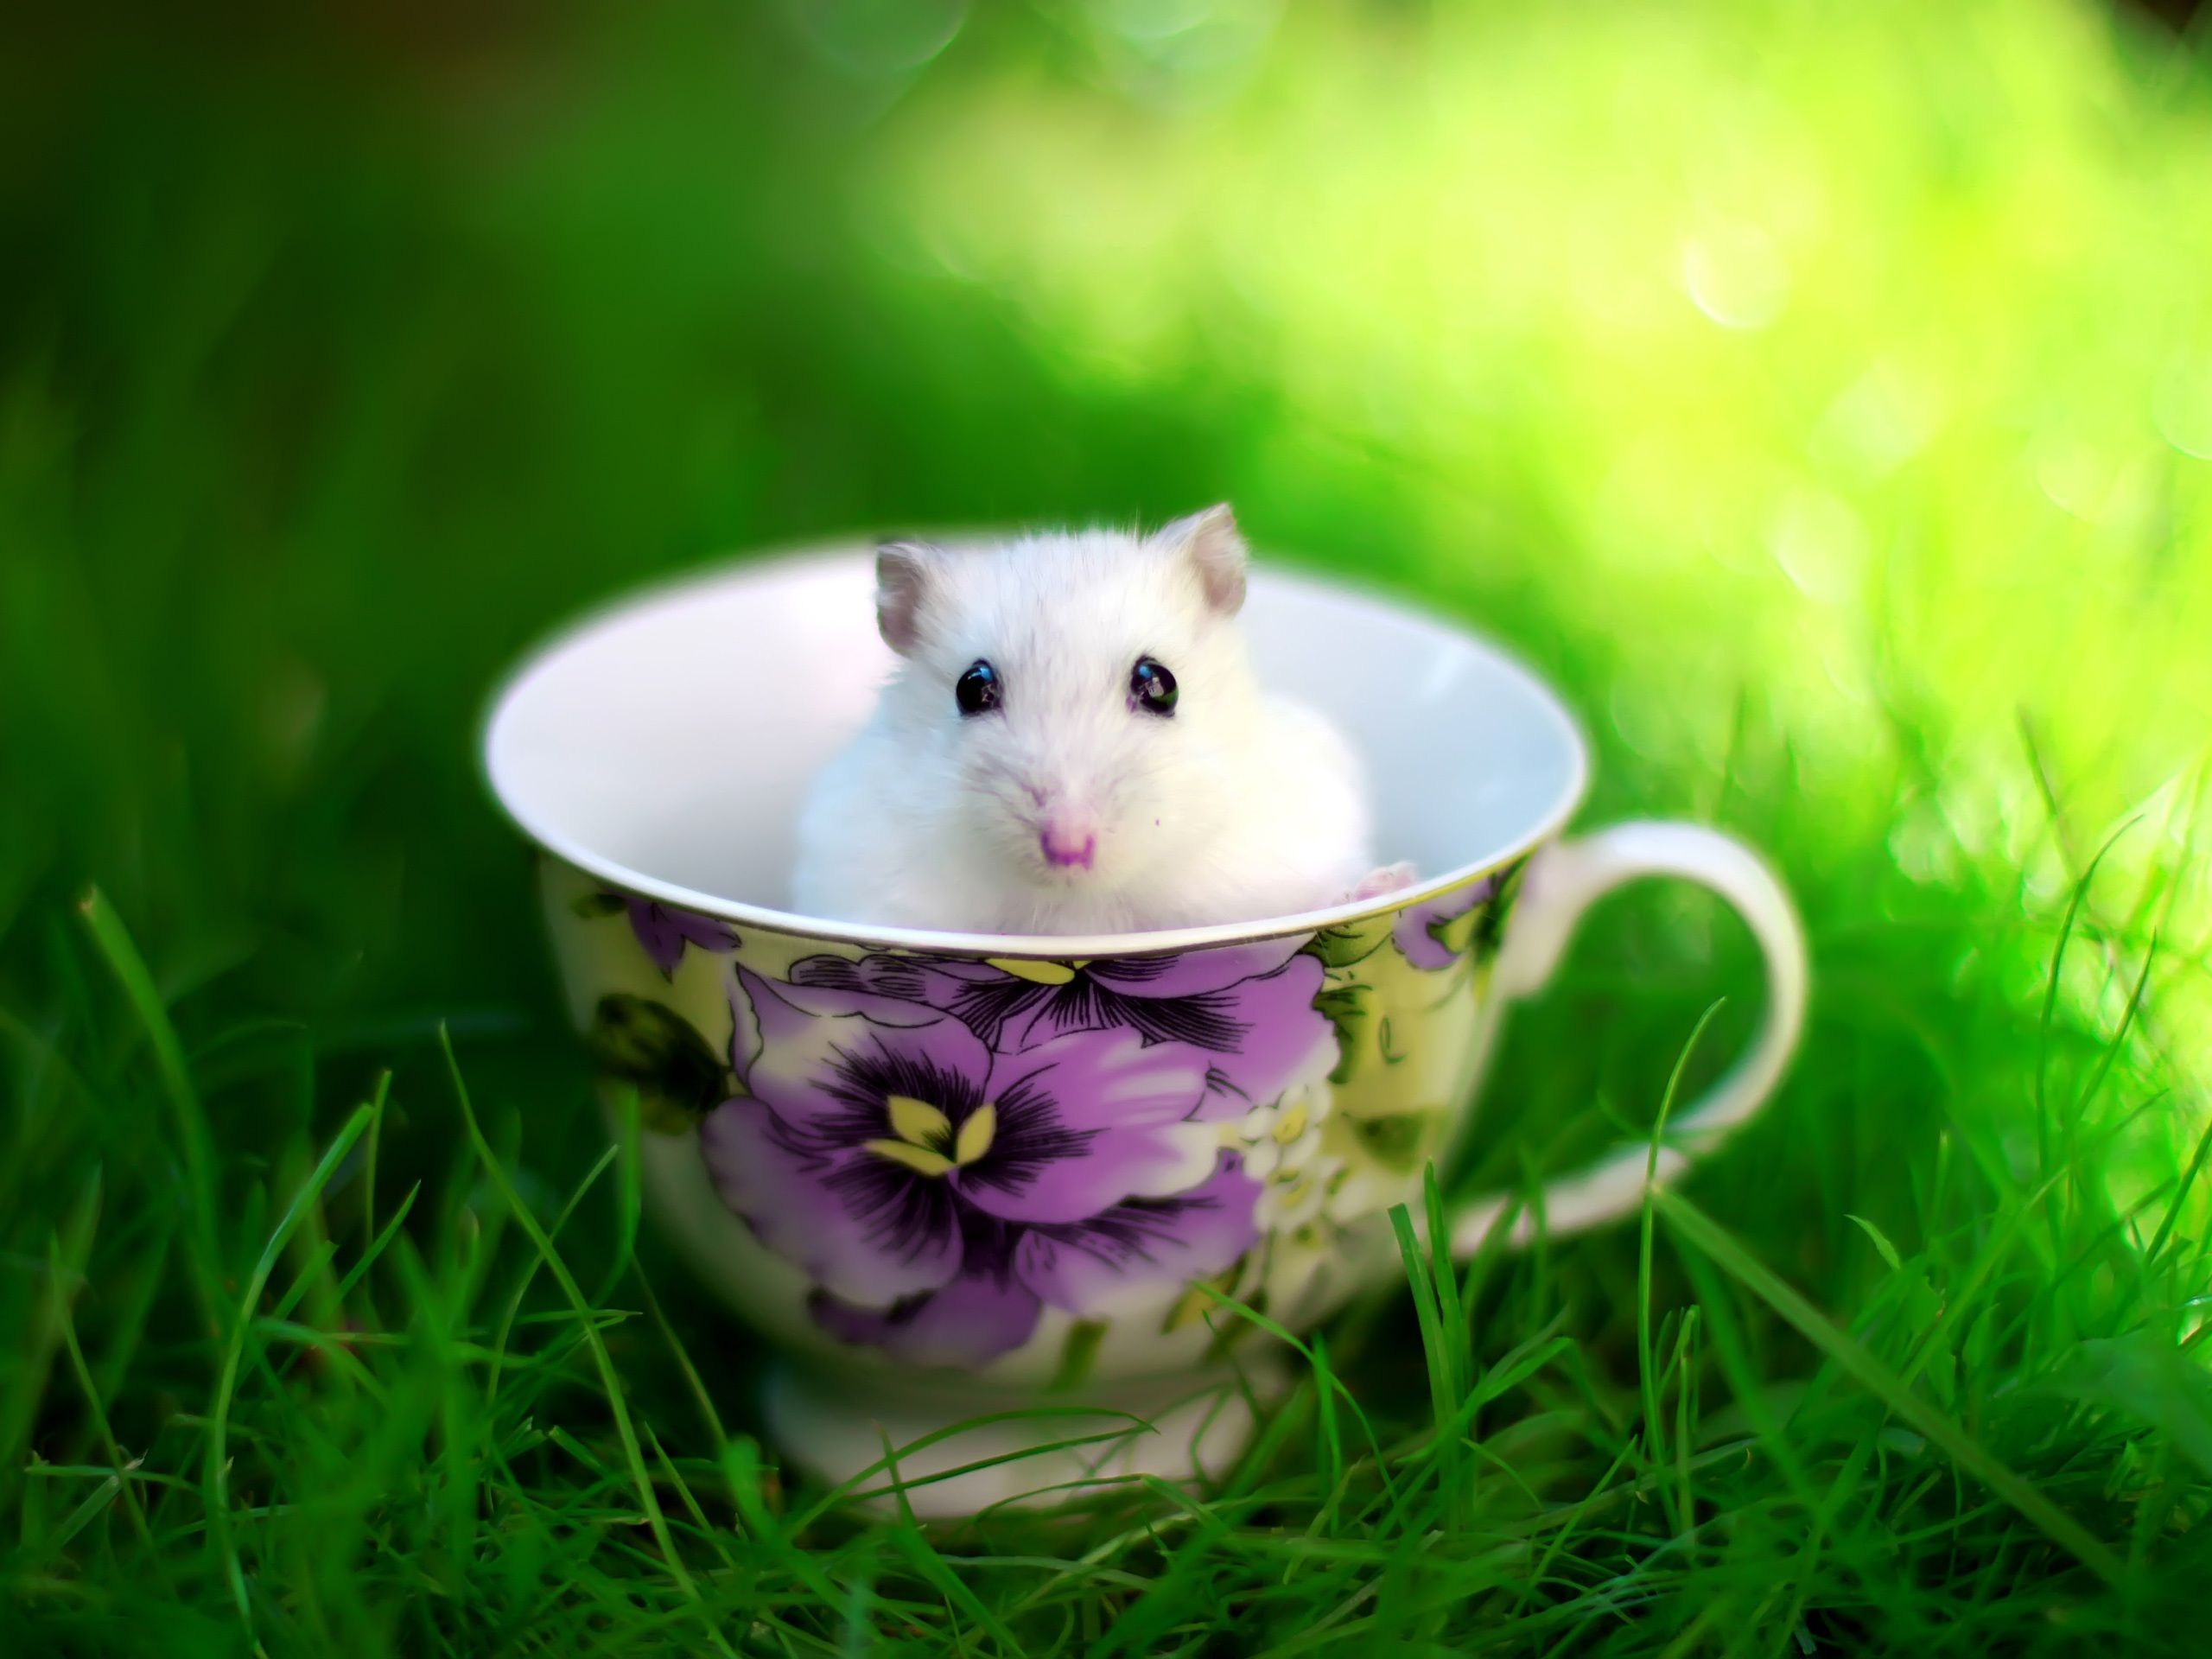 The lovely mice in the teacup Wallpaper | 2560x1920 resolution ...